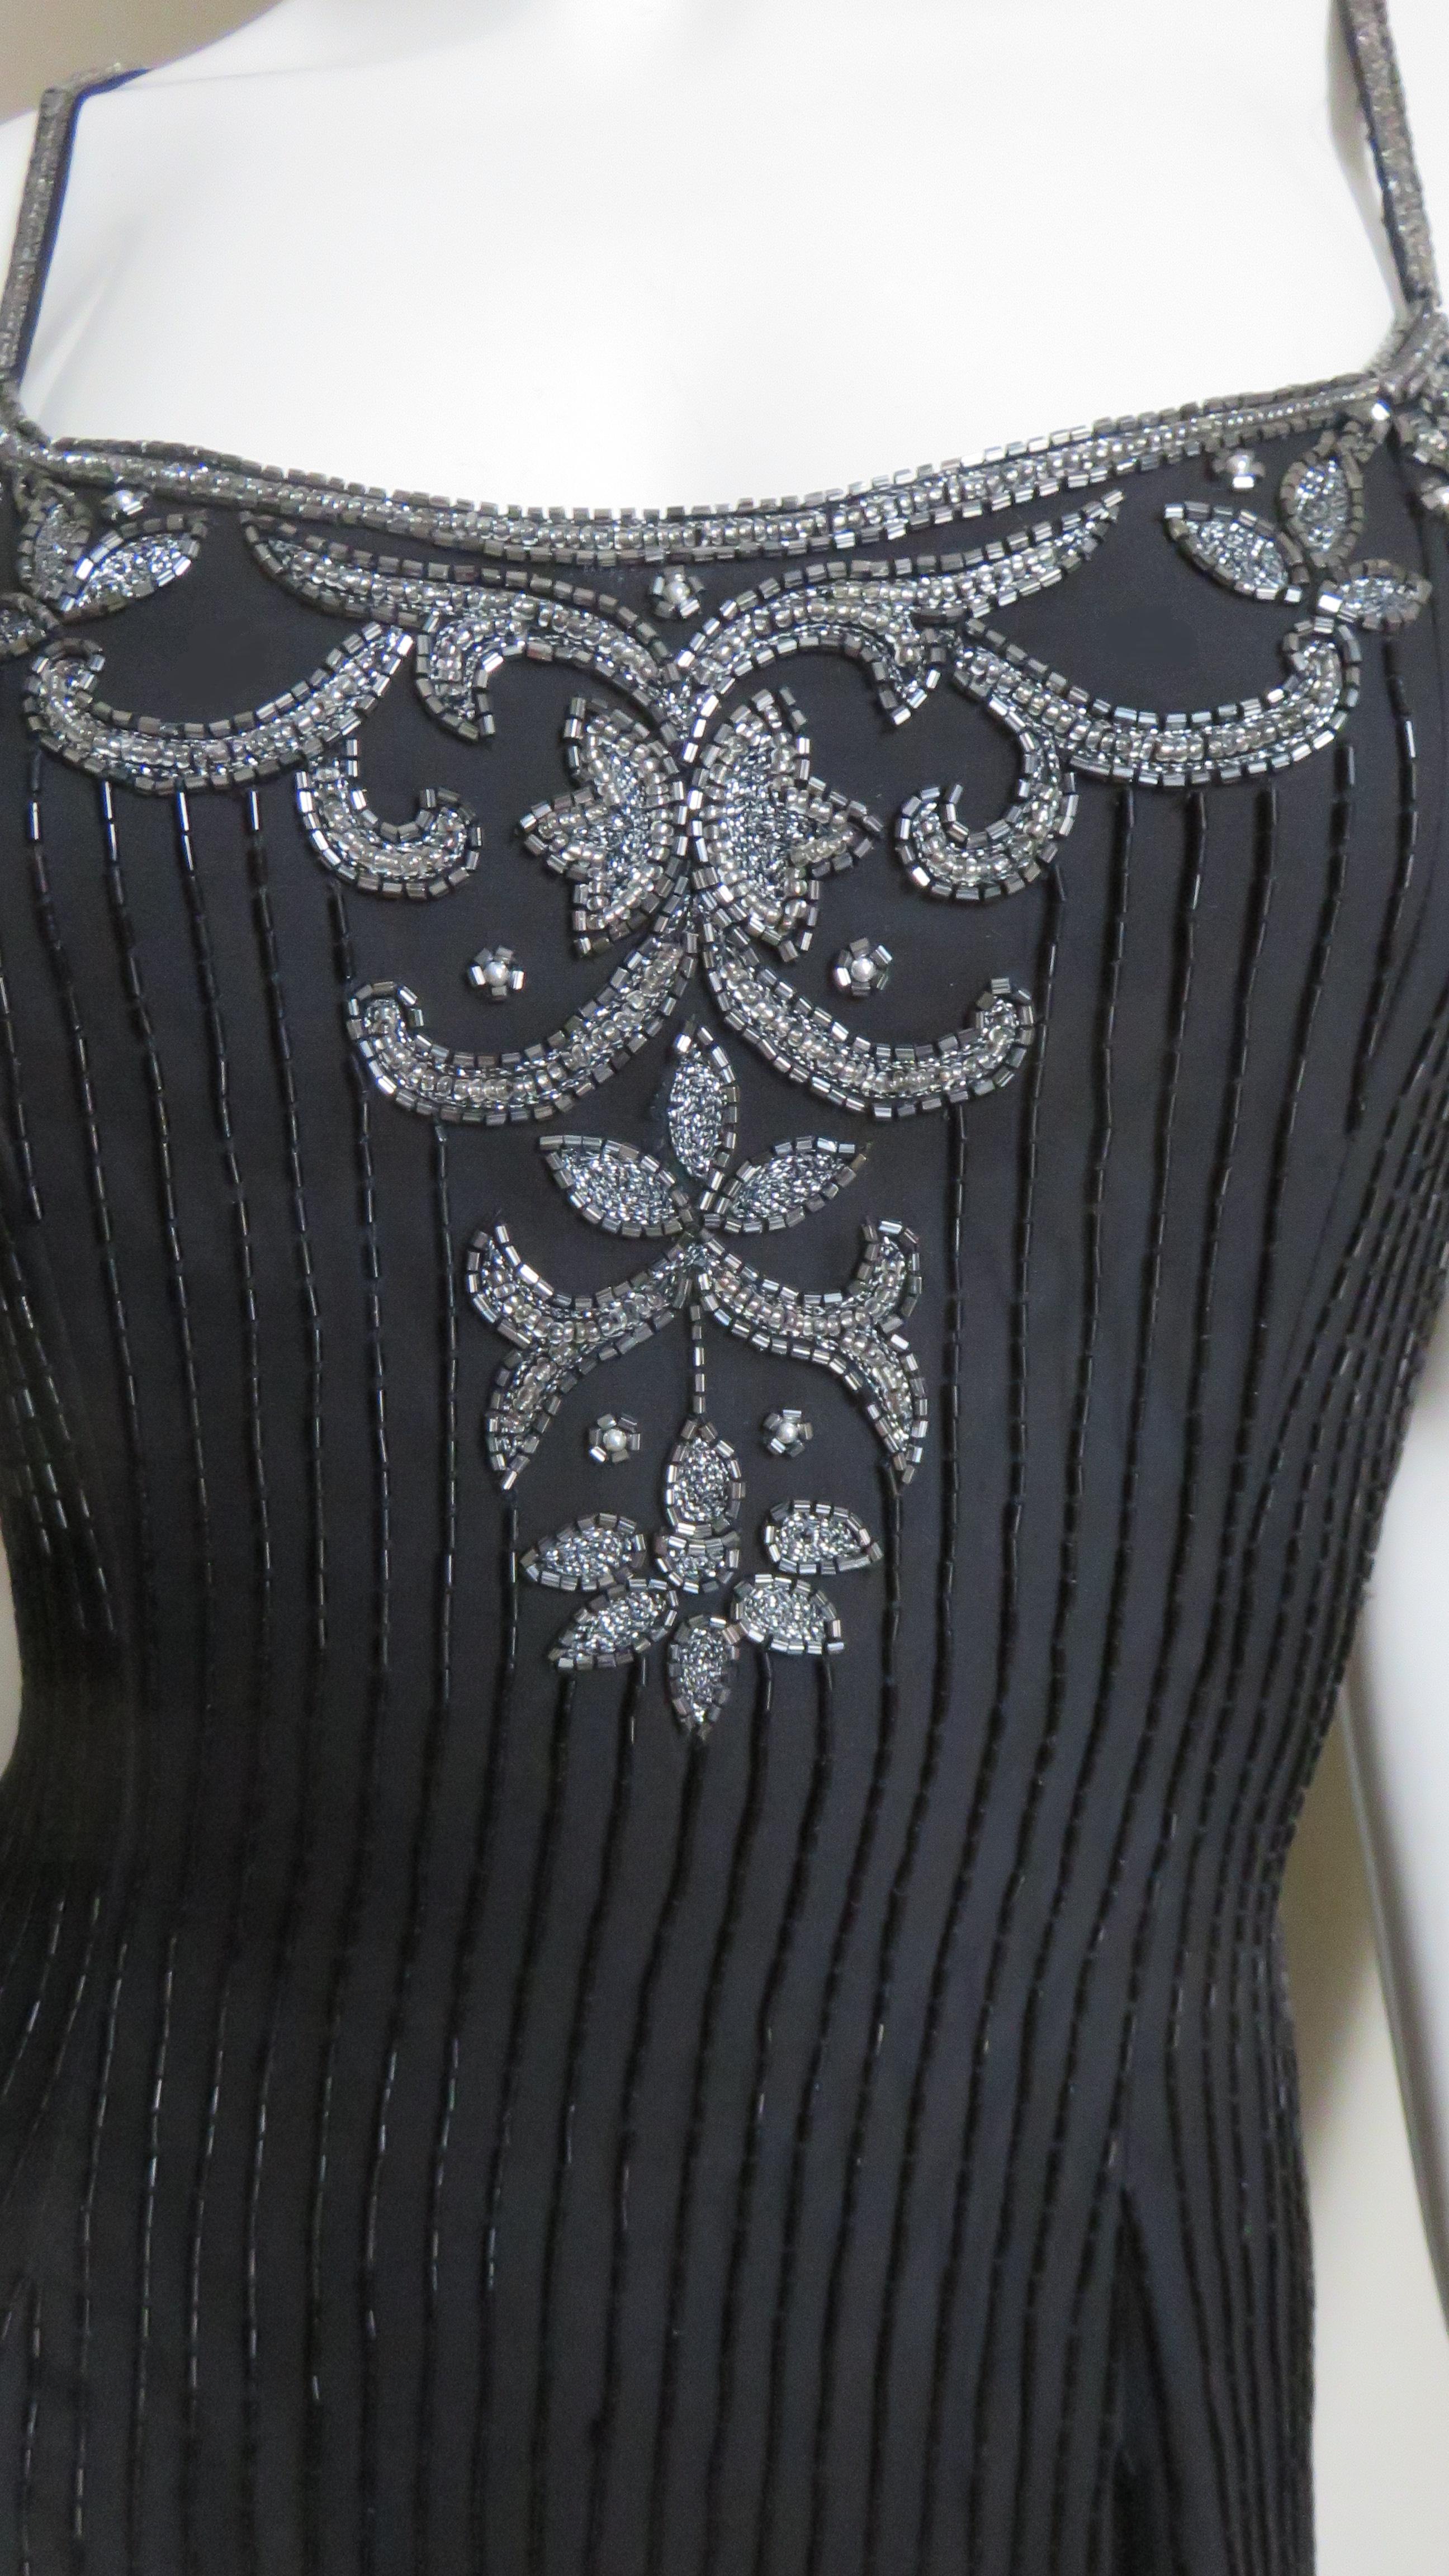 Black Sonia Rykiel Silk Beaded Gown with Elaborate Sheer Back 1990s For Sale